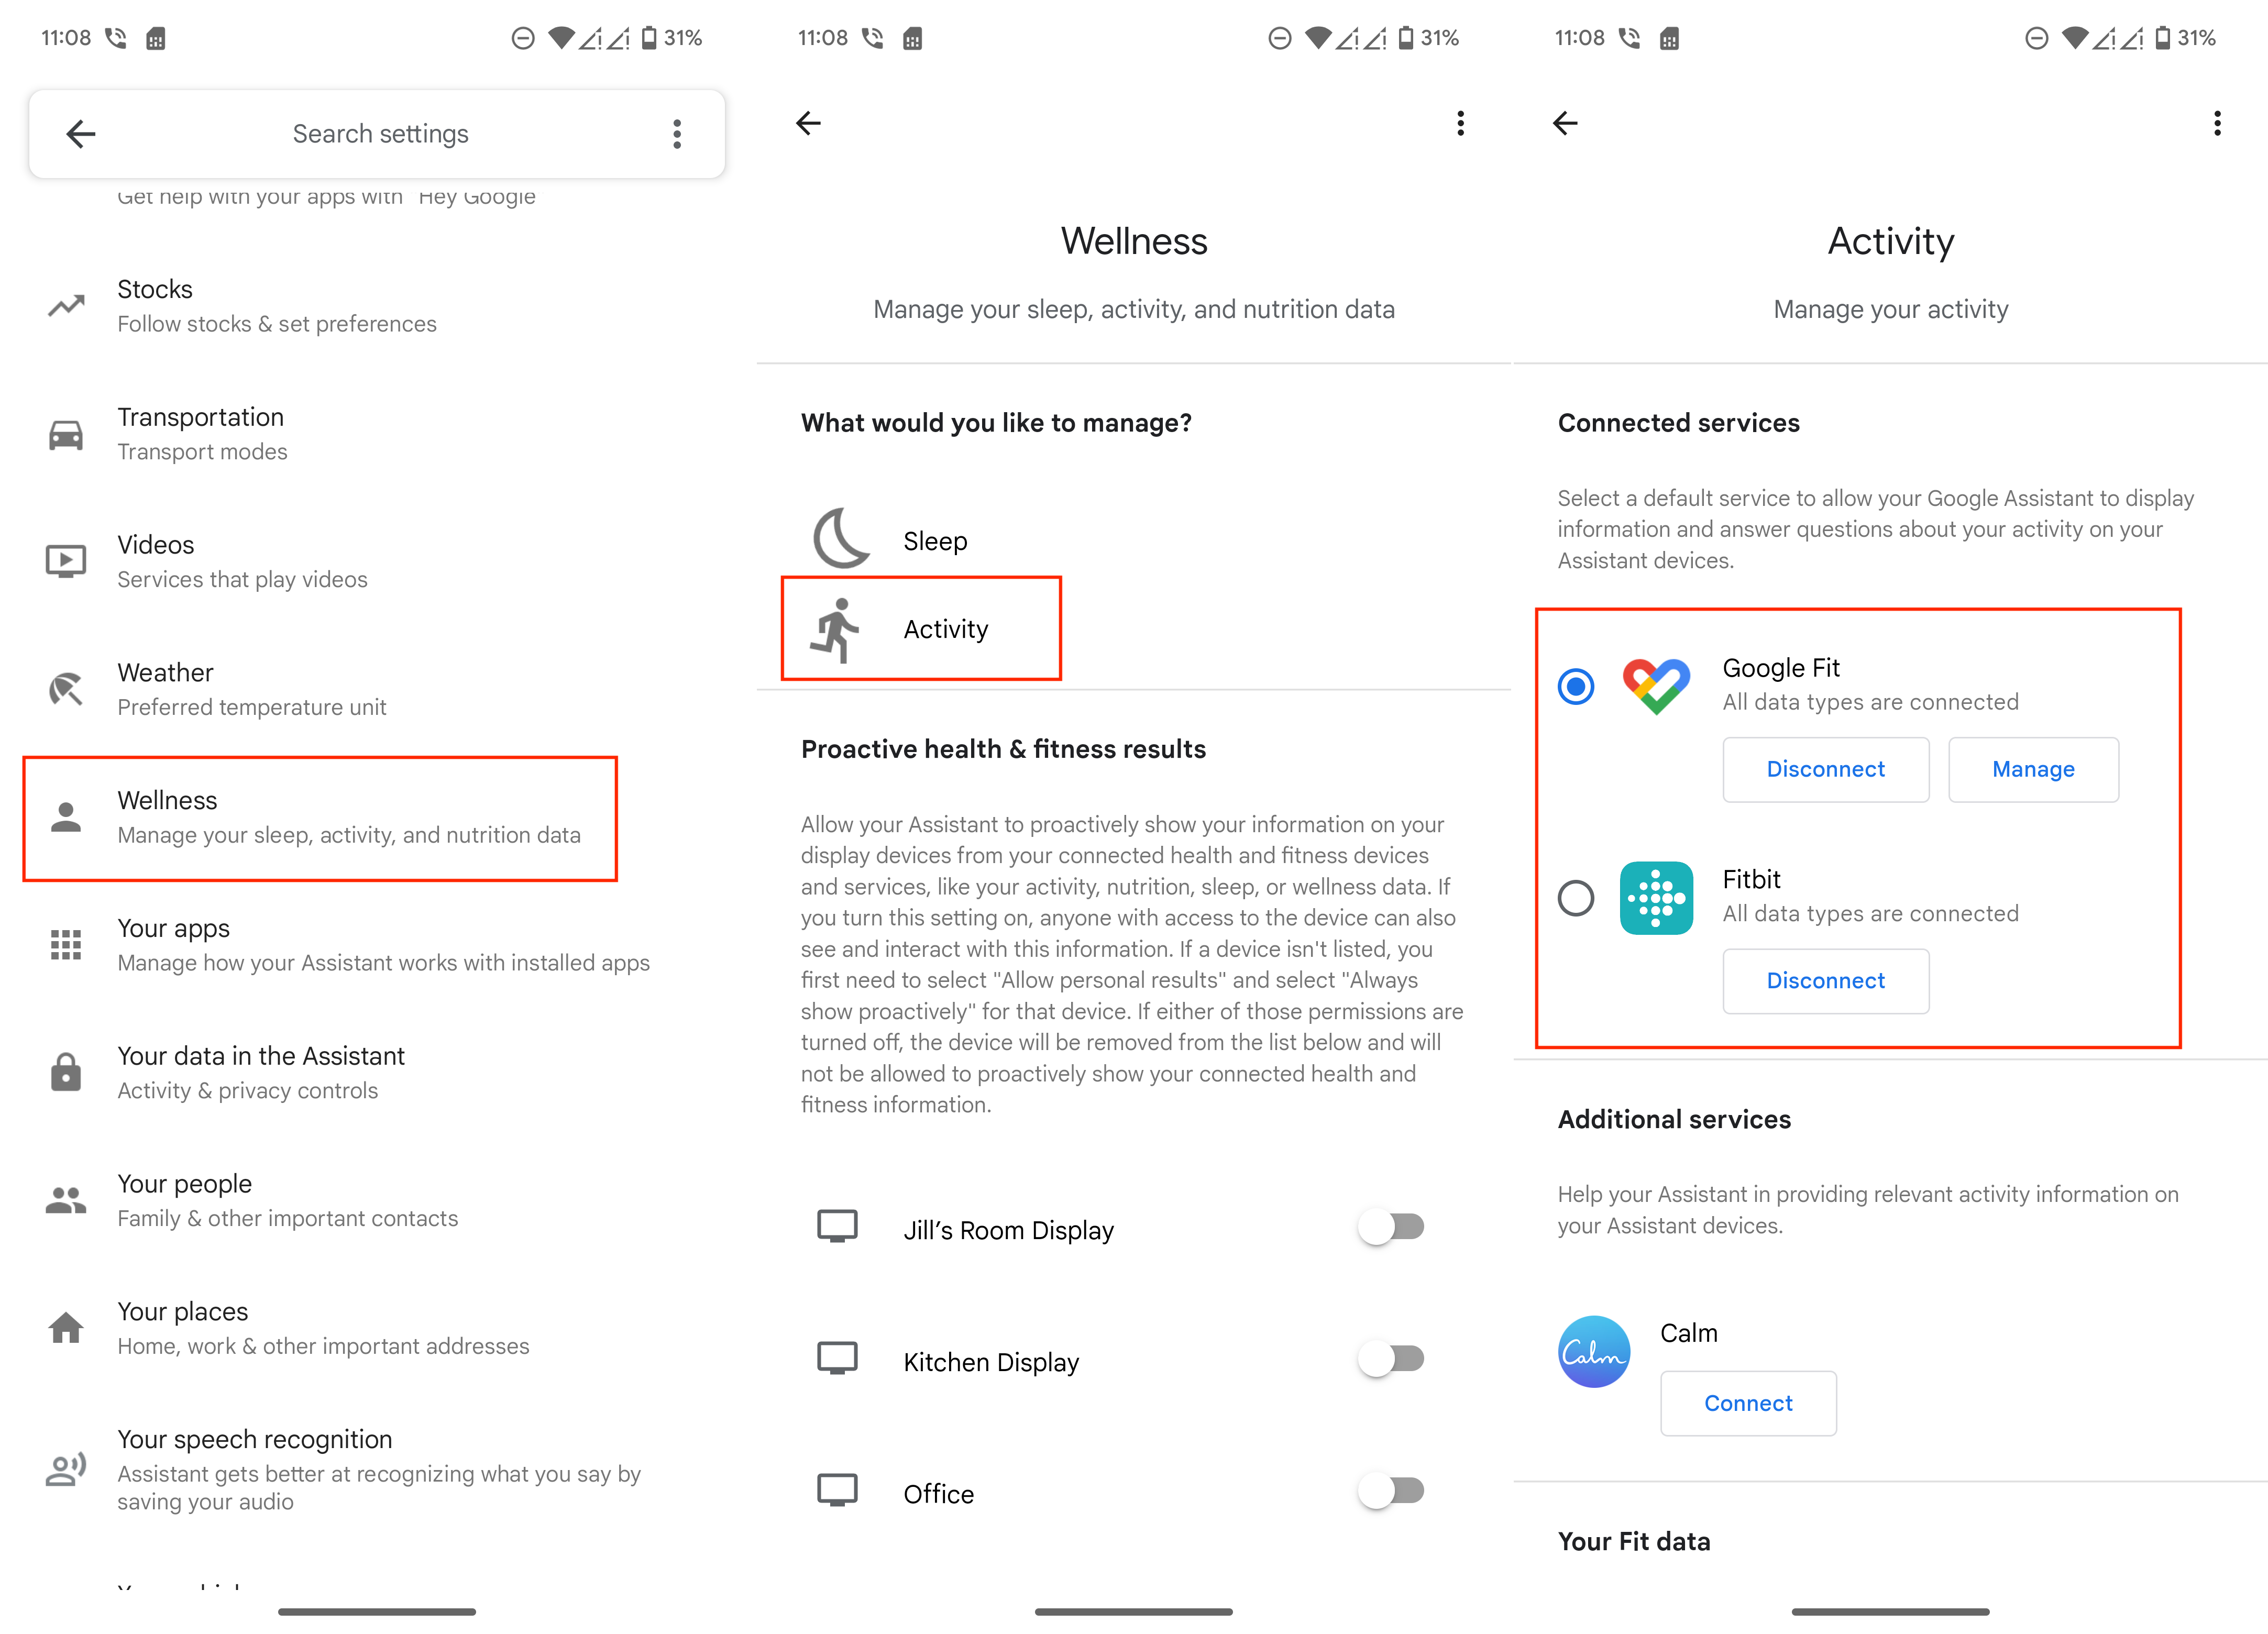 Connect Fitbit and Google Fit to the Google Assistant